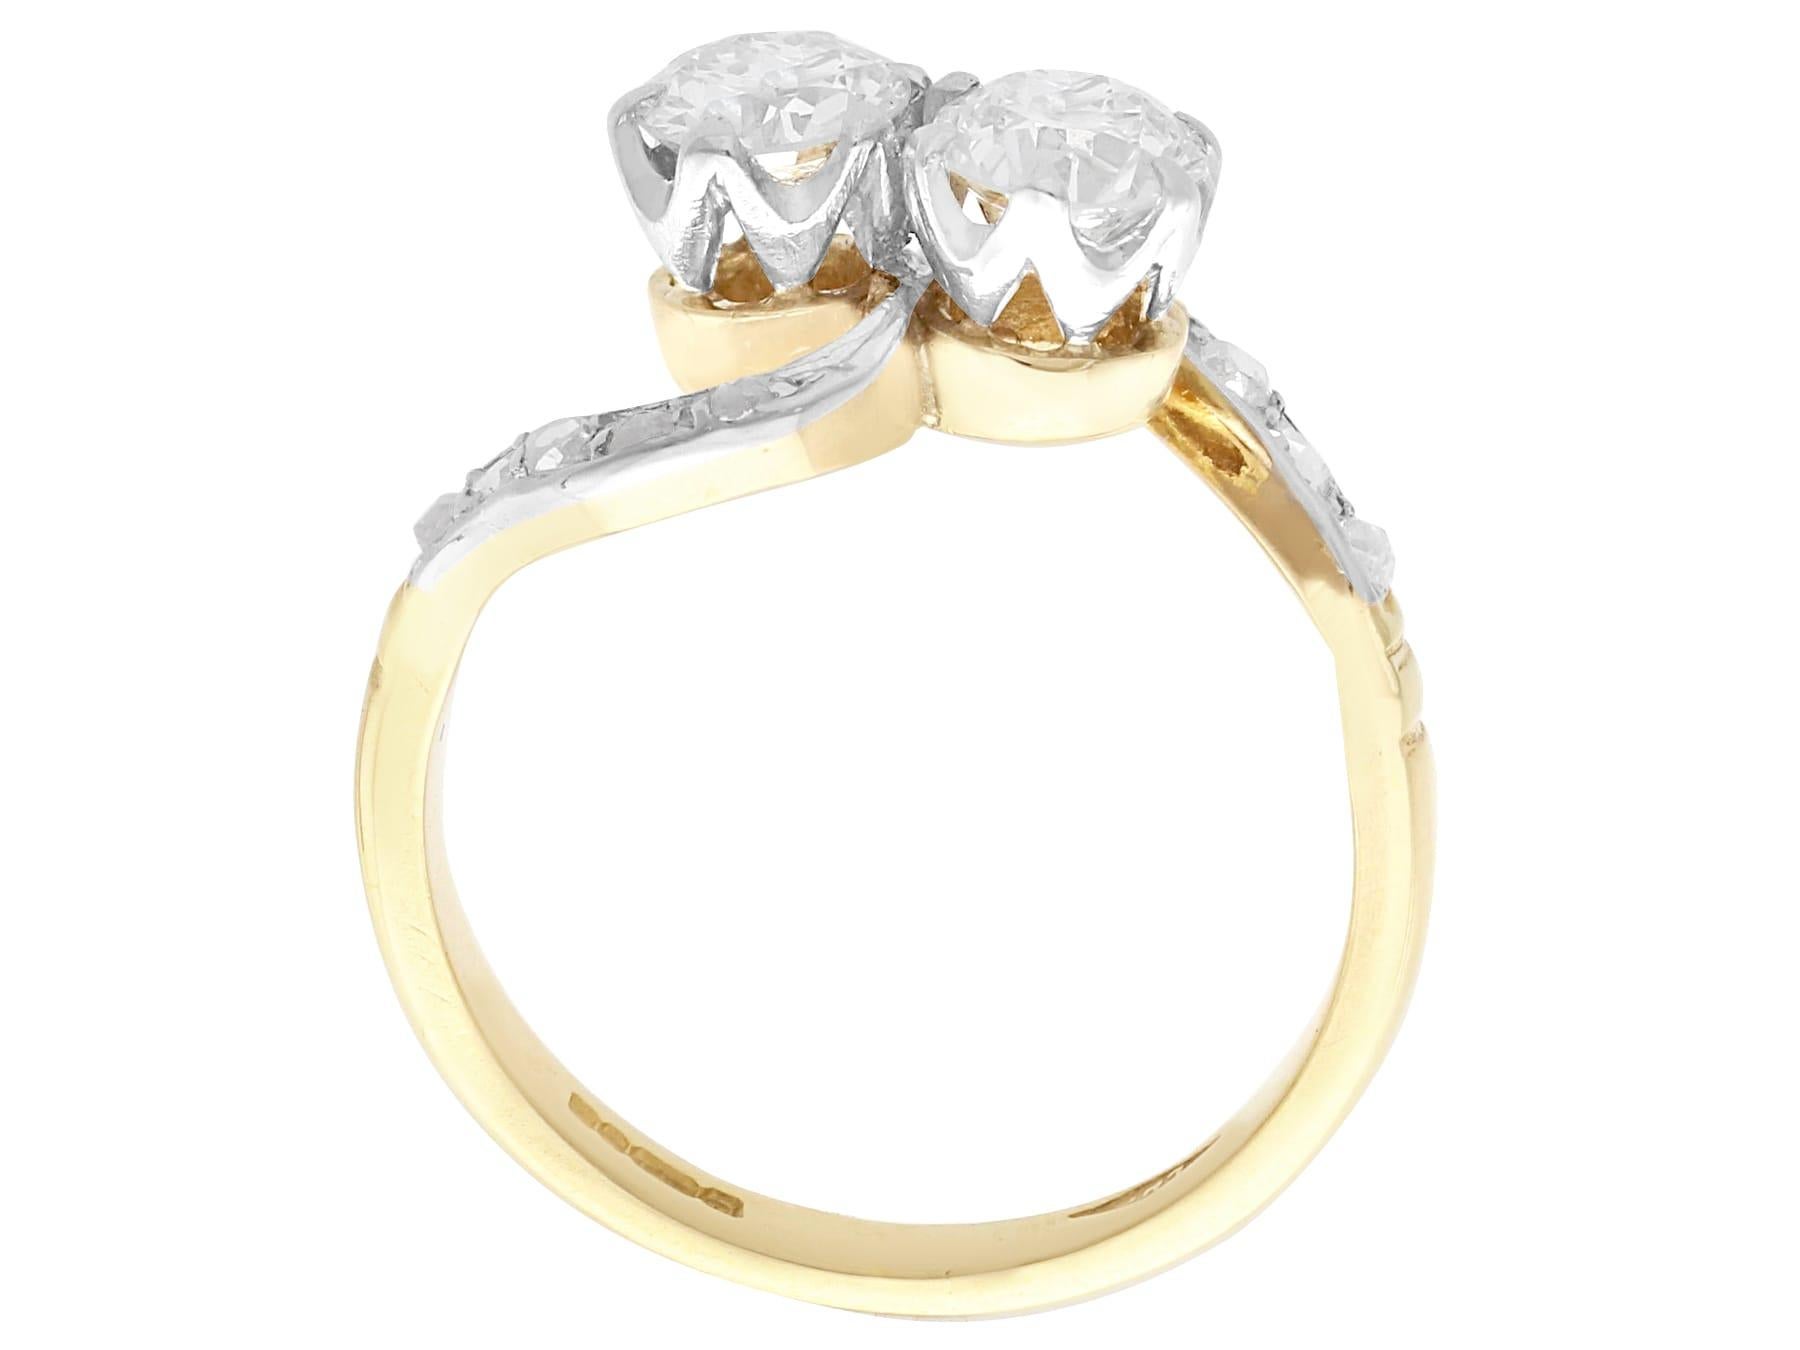 Women's or Men's Antique and Vintage 1.22 Carat Diamond and 18 Karat Yellow Gold Twist Ring For Sale